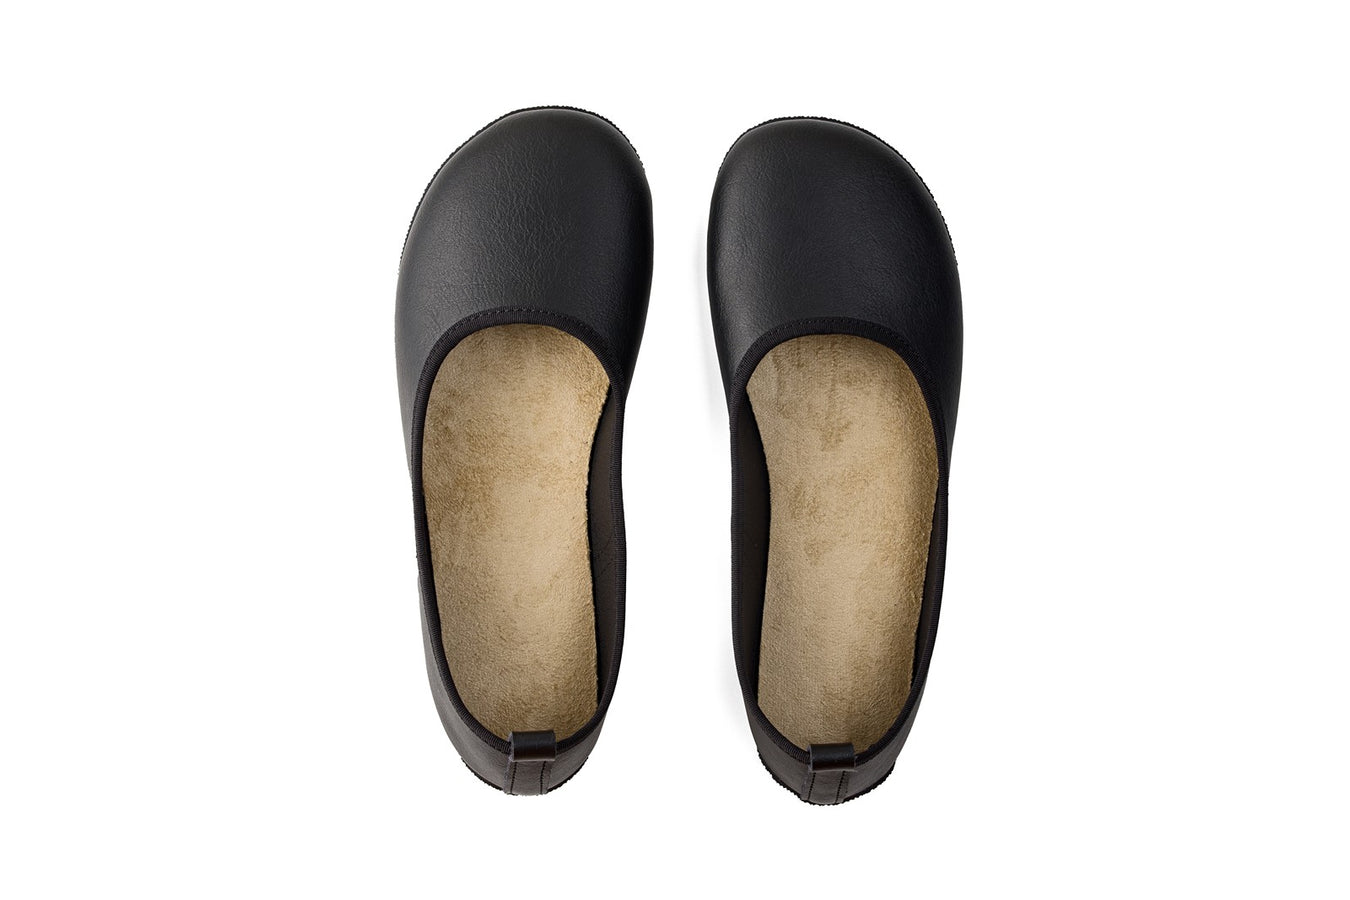 Barefoot ballet flats for narrow feet - Black - IN STOCK | Ahinsa shoes 👣